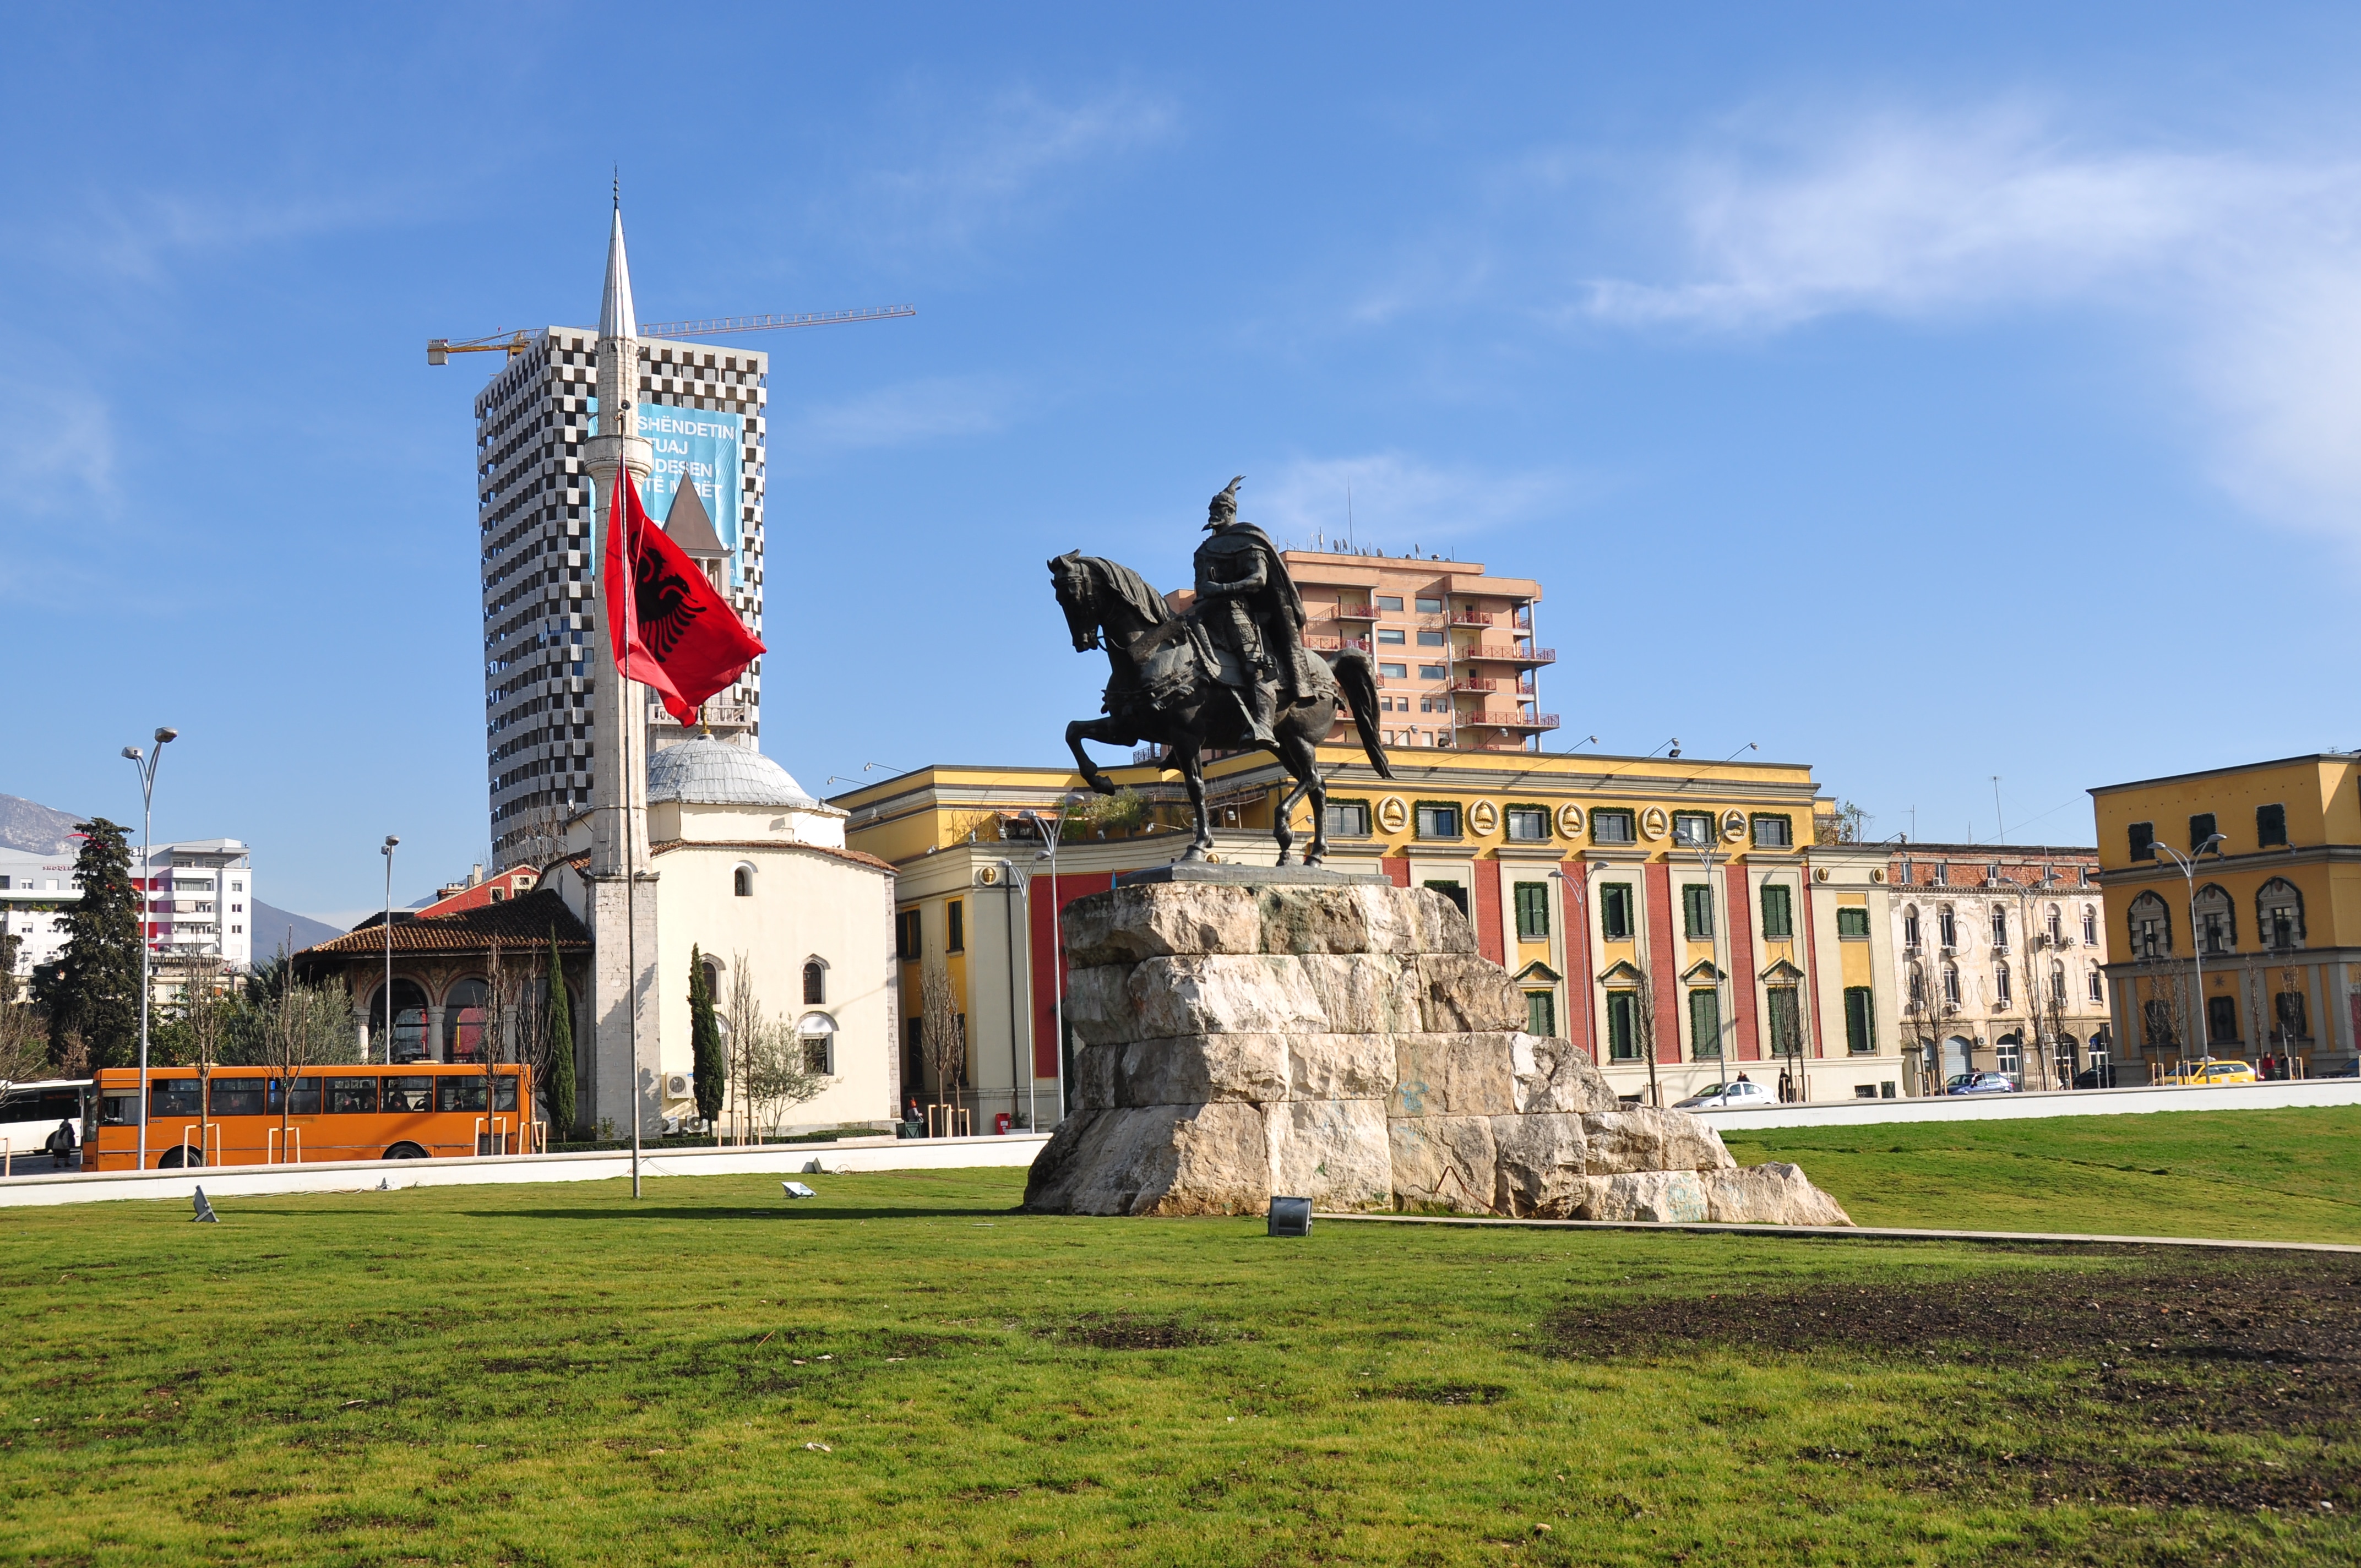 places to visit in Albania